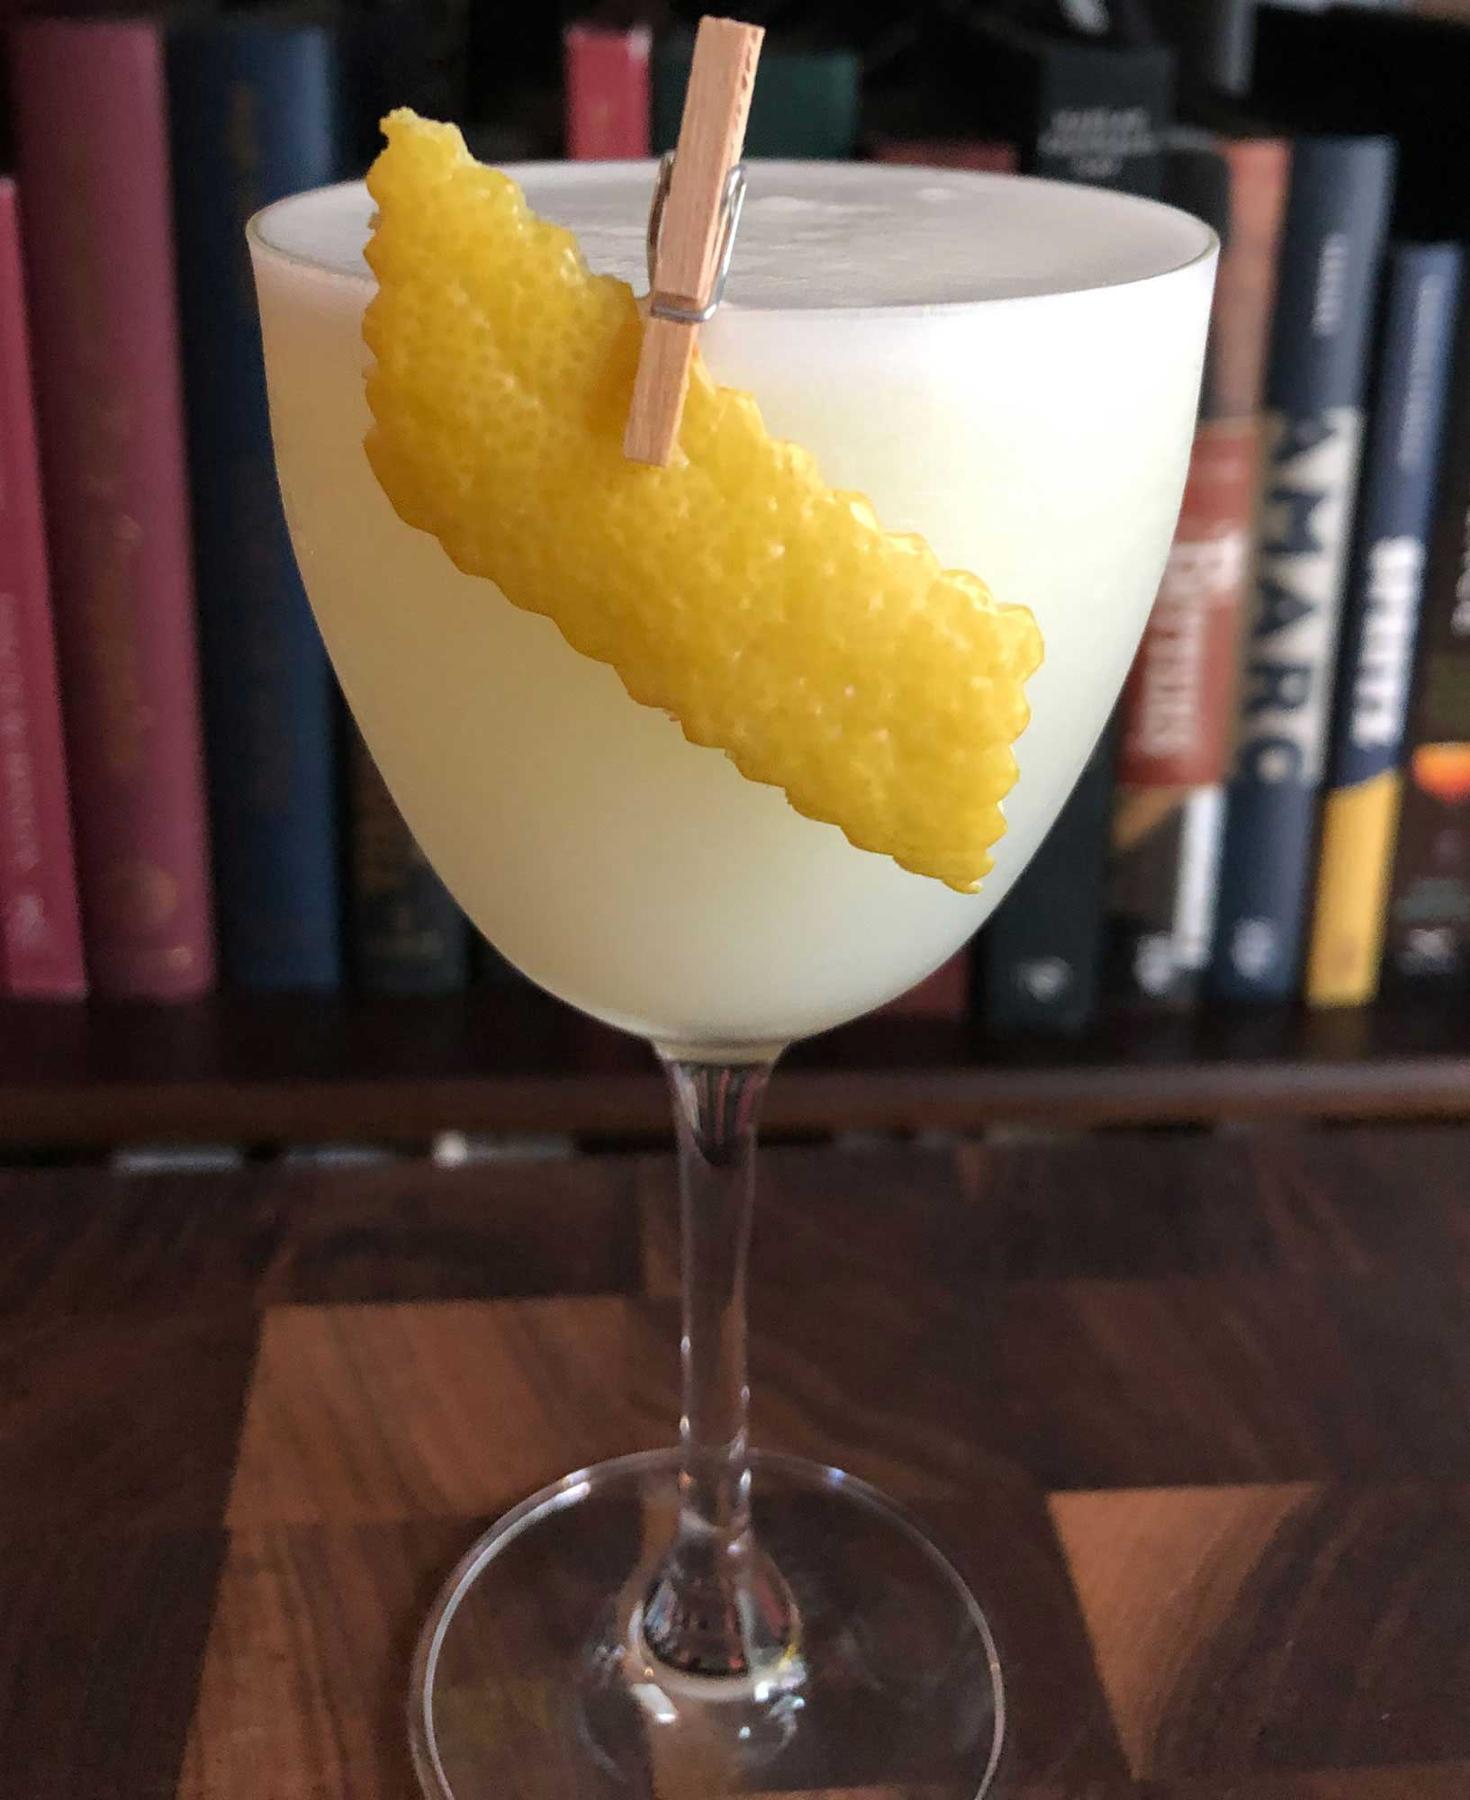 An example of the White Lady, the mixed drink (drink) featuring Hayman’s London Dry Gin, egg white, orange-flavored liqueur, lemon juice, and lemon twist; photo by Lee Edwards